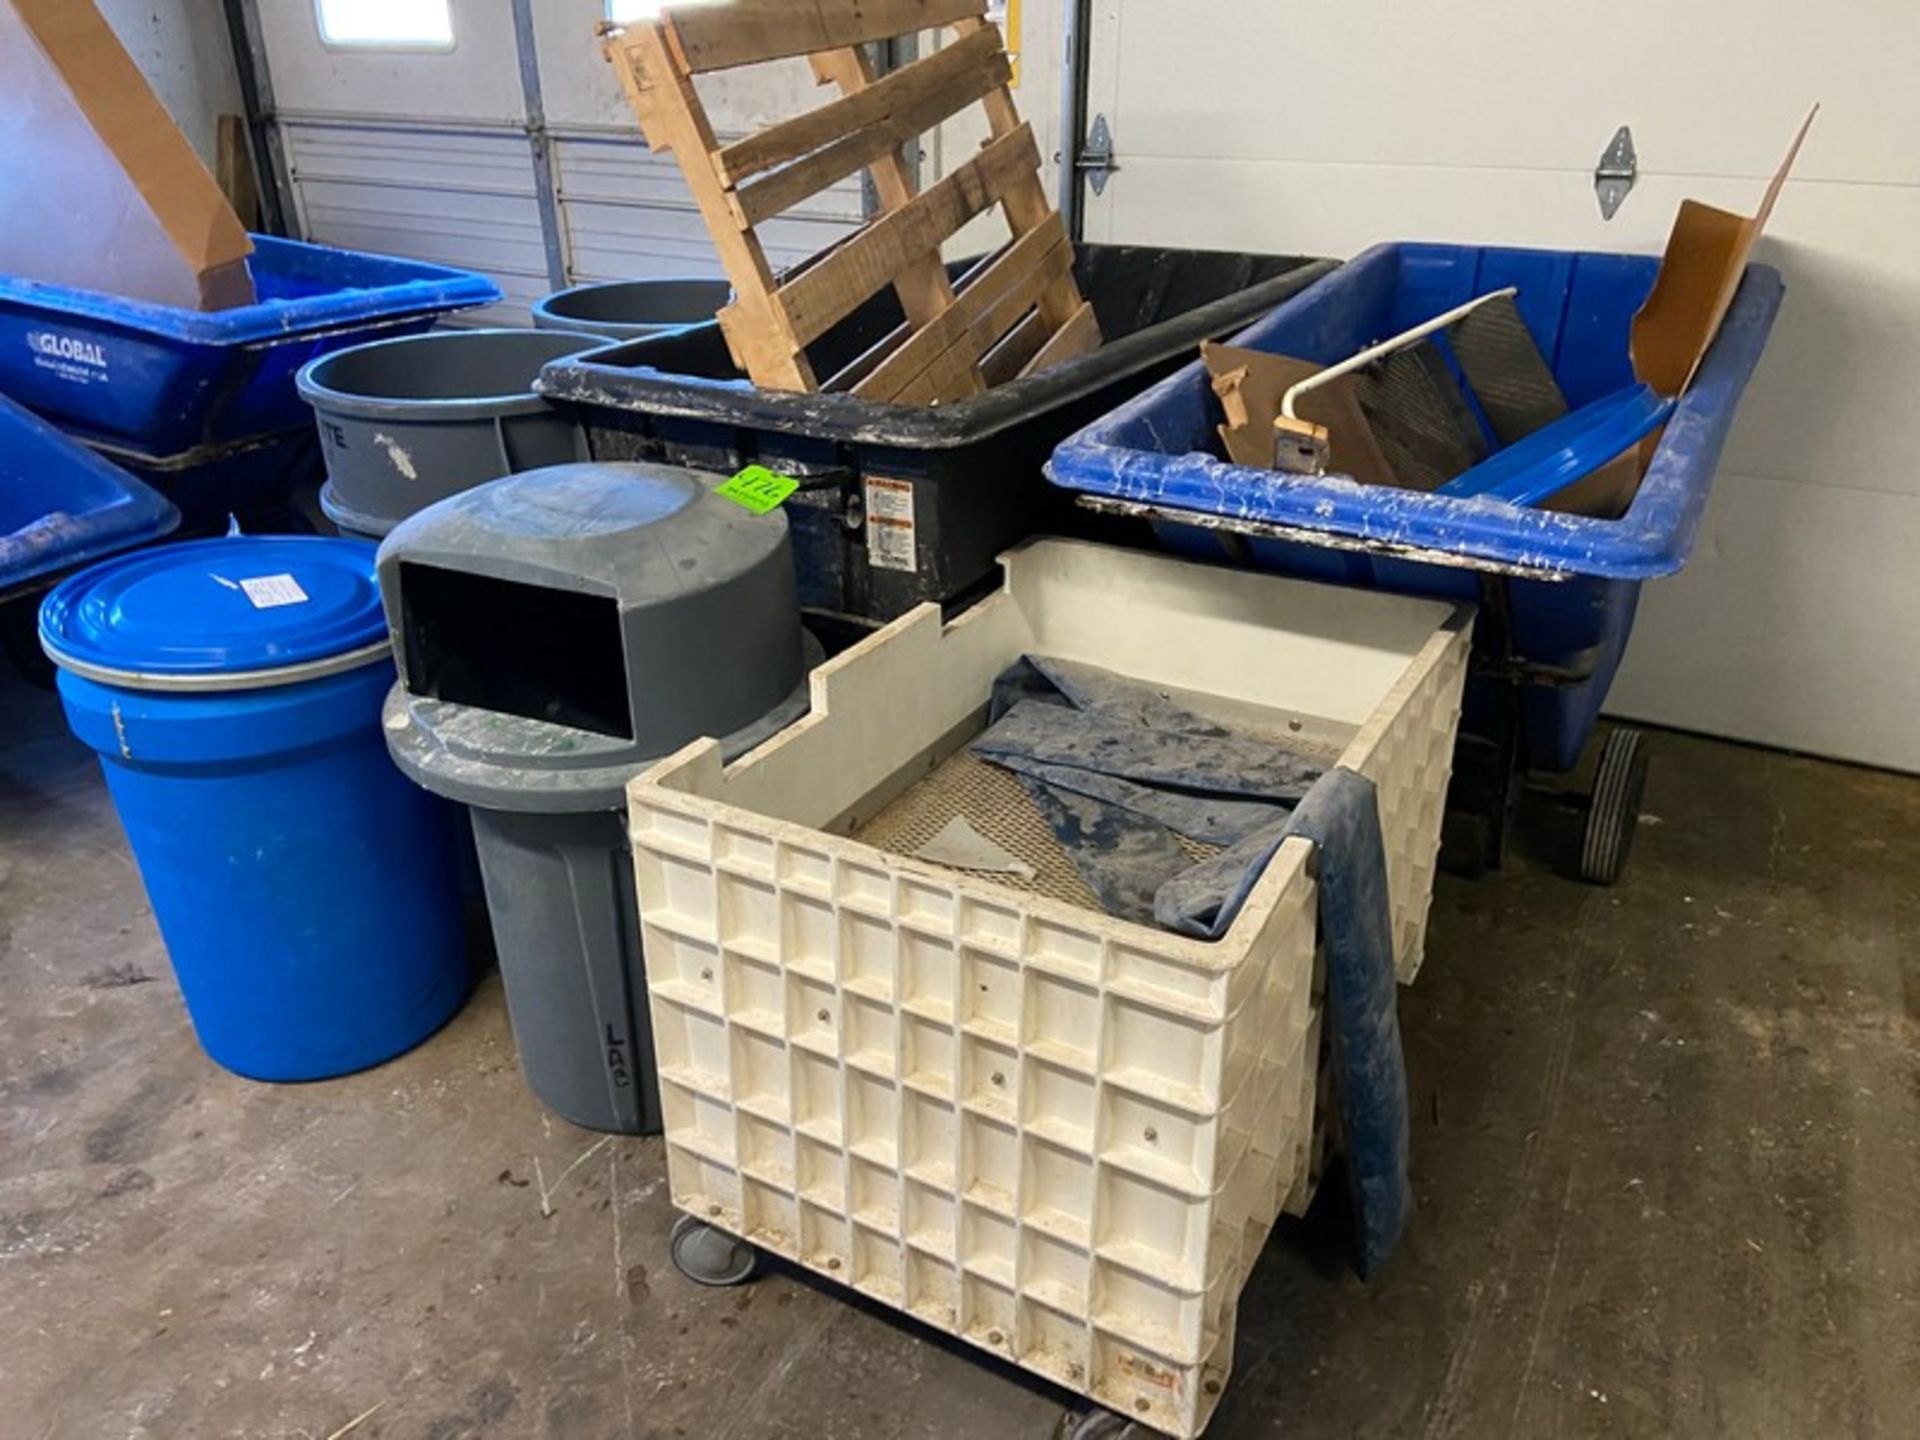 LOT OF ASSORTED PLASTIC TRASH DUMPSTERS, TRASH CANS, & PLASTIC BIN (LOCATED IN CALLERY, PA) - Image 2 of 2